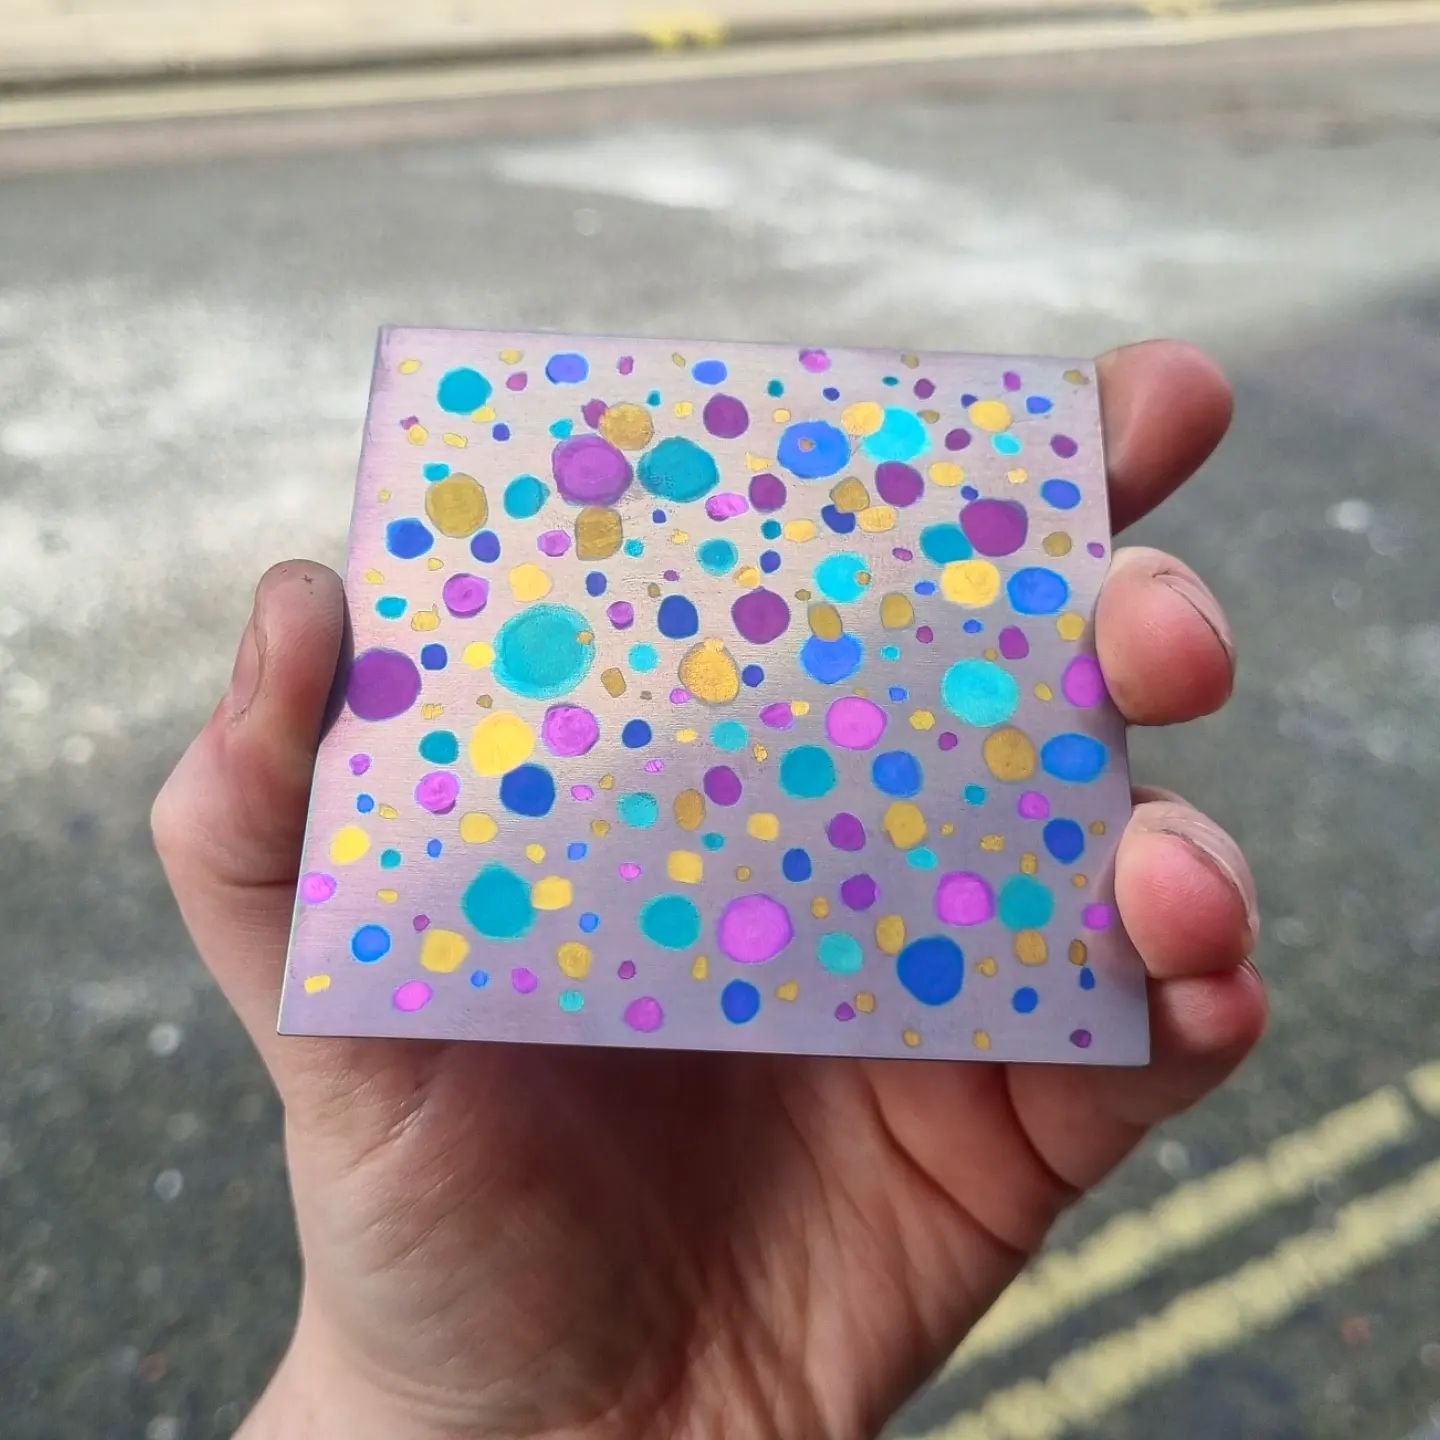 absolute fab workshop today at @theforgespace learning all about niobium and learning to anodise with @alicefryjewellery ! 🌈✨️loved how much science was behind it all, and trying to visualise how my own style could translate! my very rough first go 